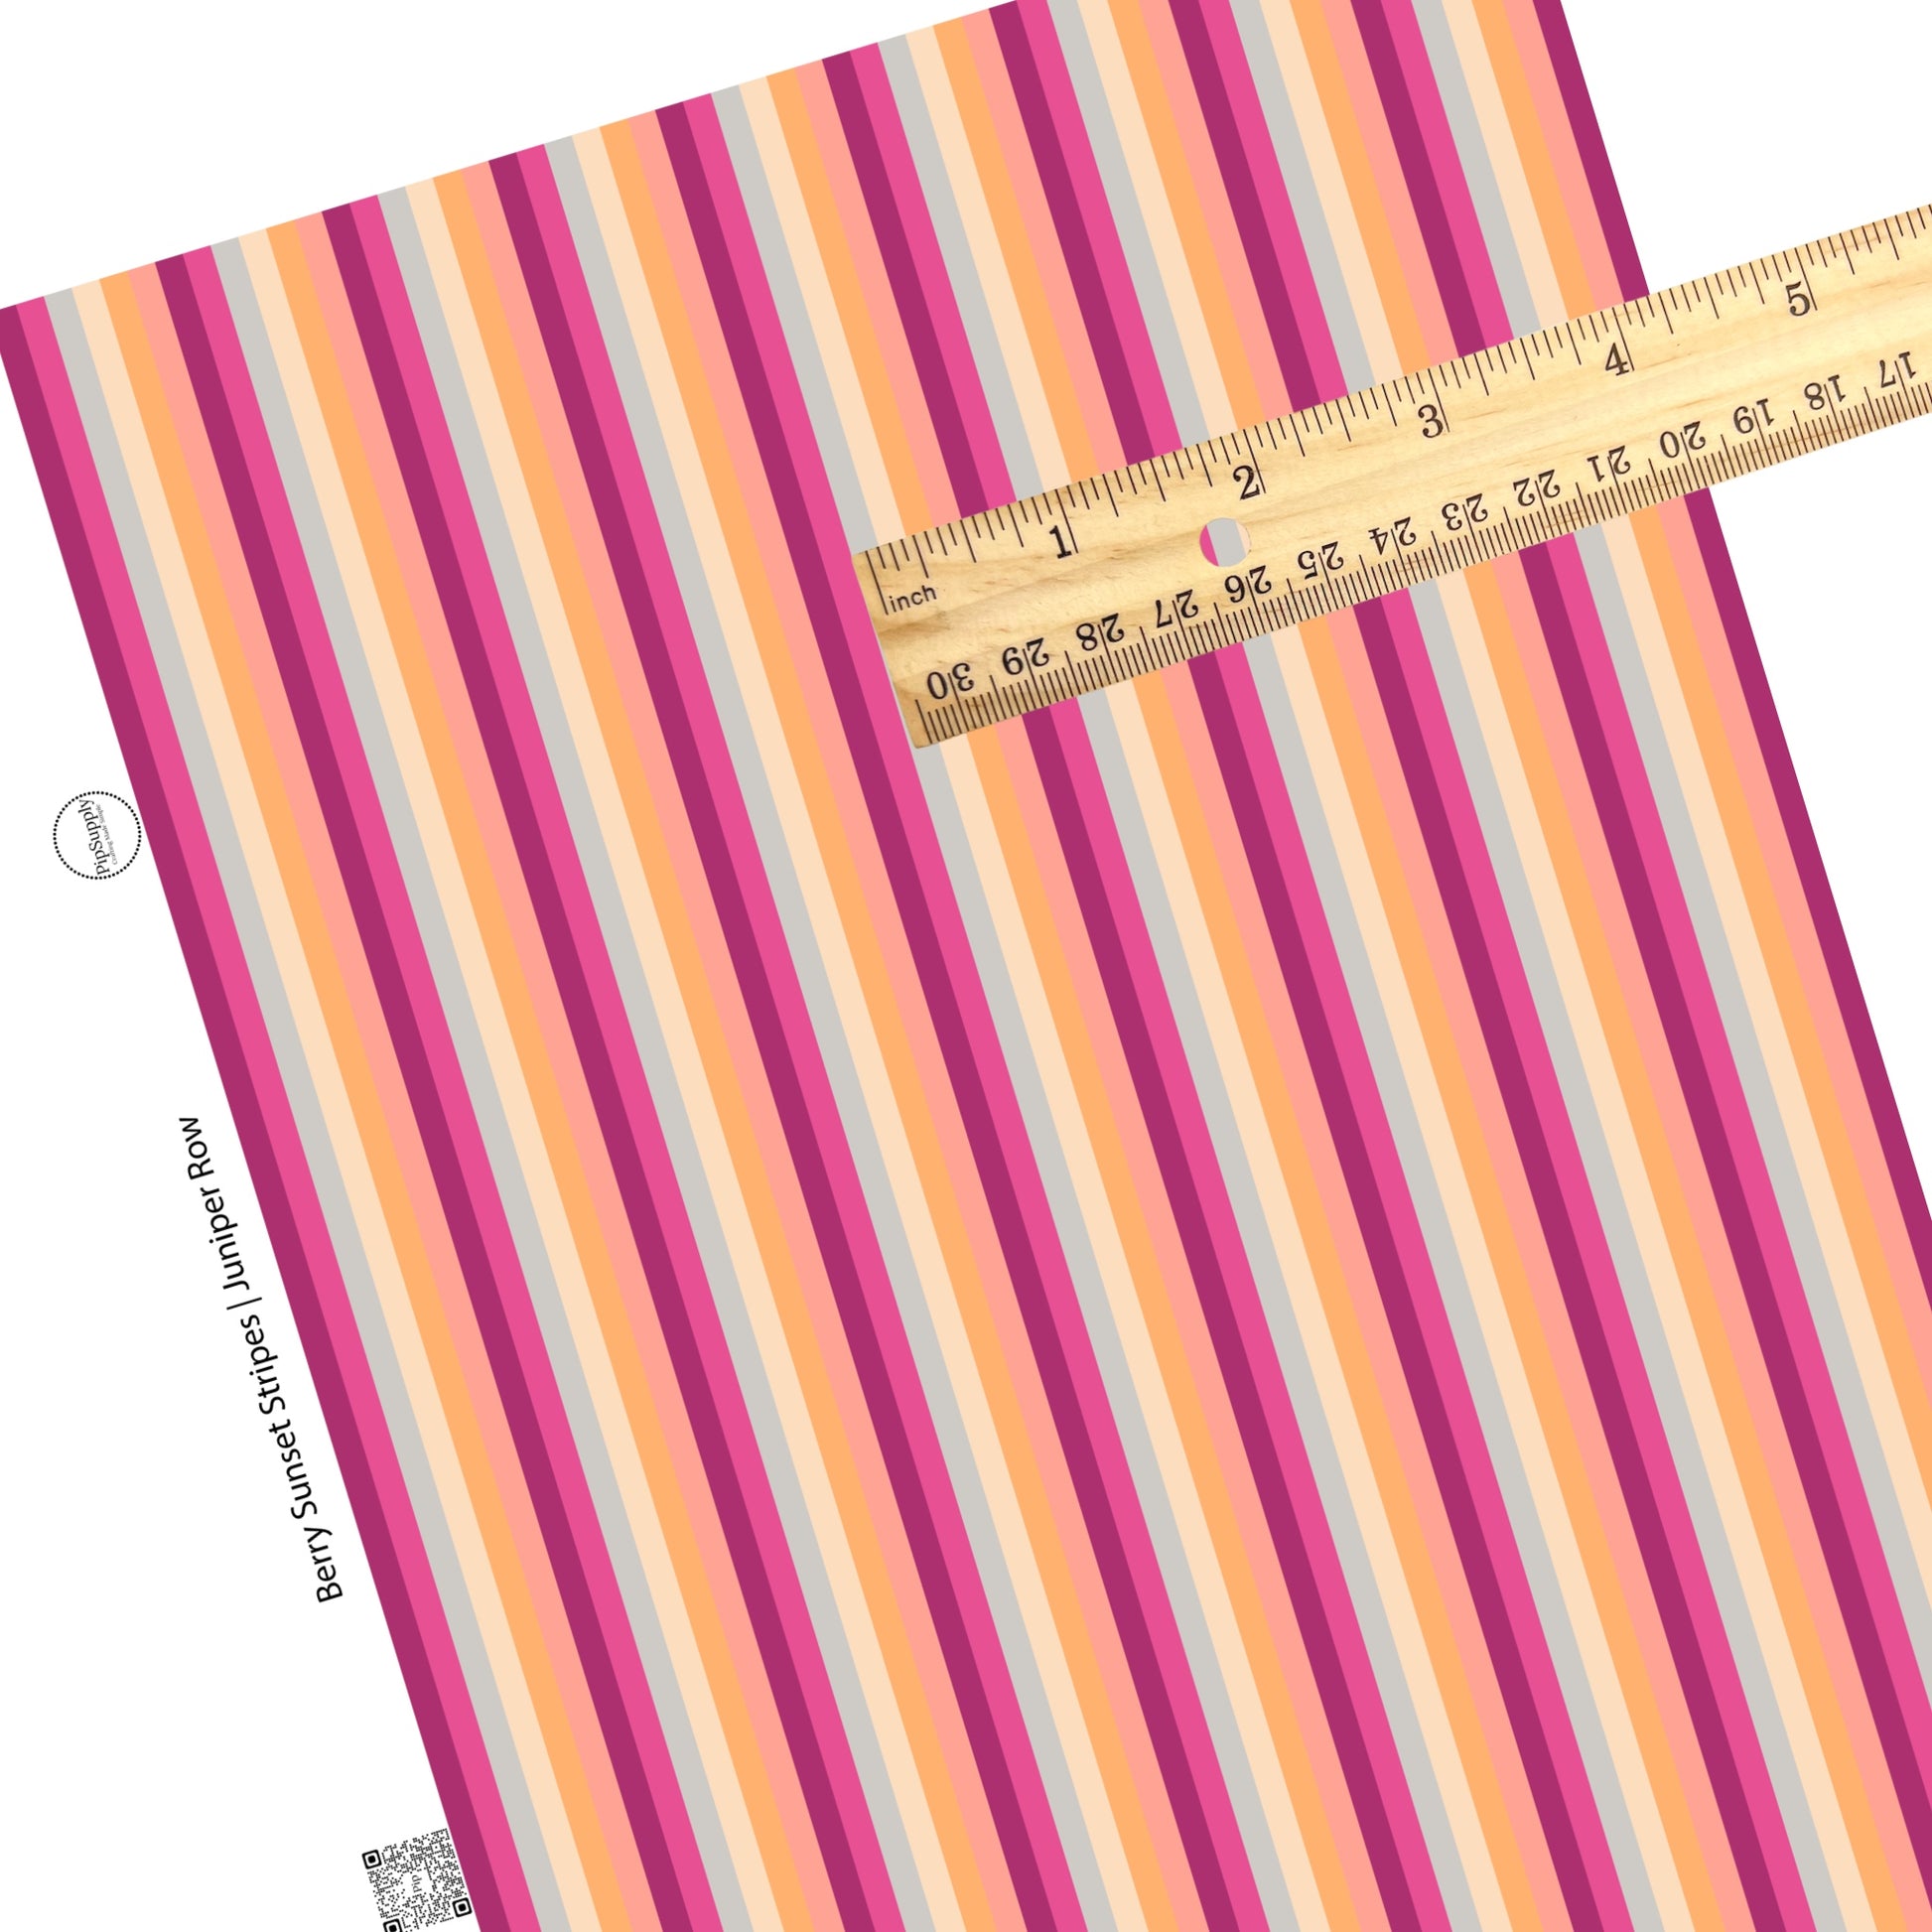 These Valentine's pattern themed faux leather sheets contain the following design elements: purple, pink, orange, yellow, and light blue stripes. Our CPSIA compliant faux leather sheets or rolls can be used for all types of crafting projects.